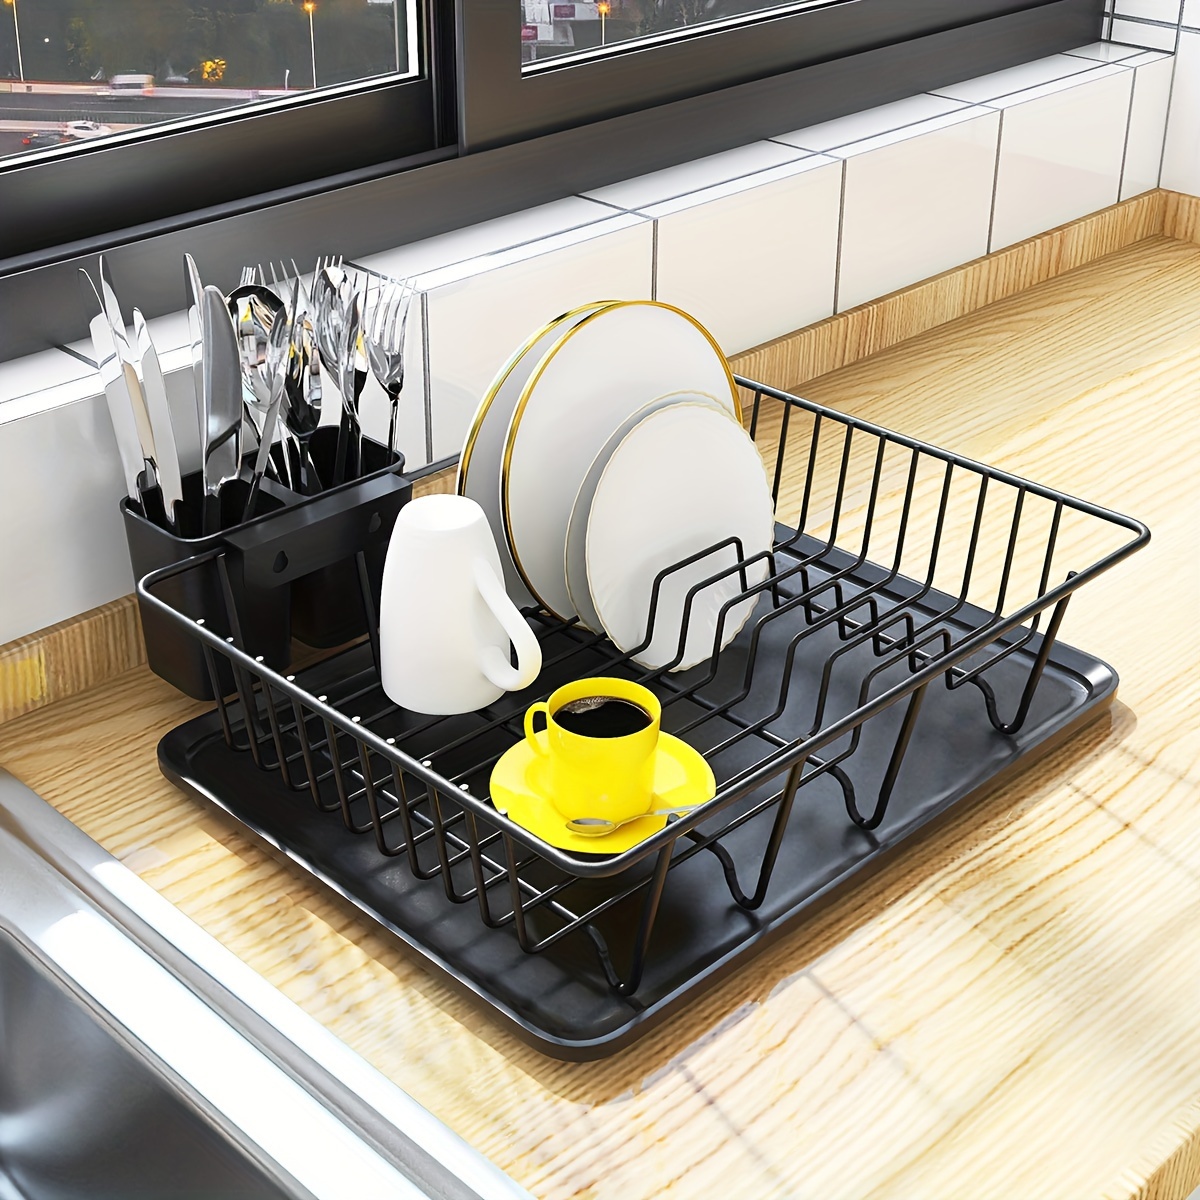  Home Magician 2 Tier Dish Drying Rack with Drain